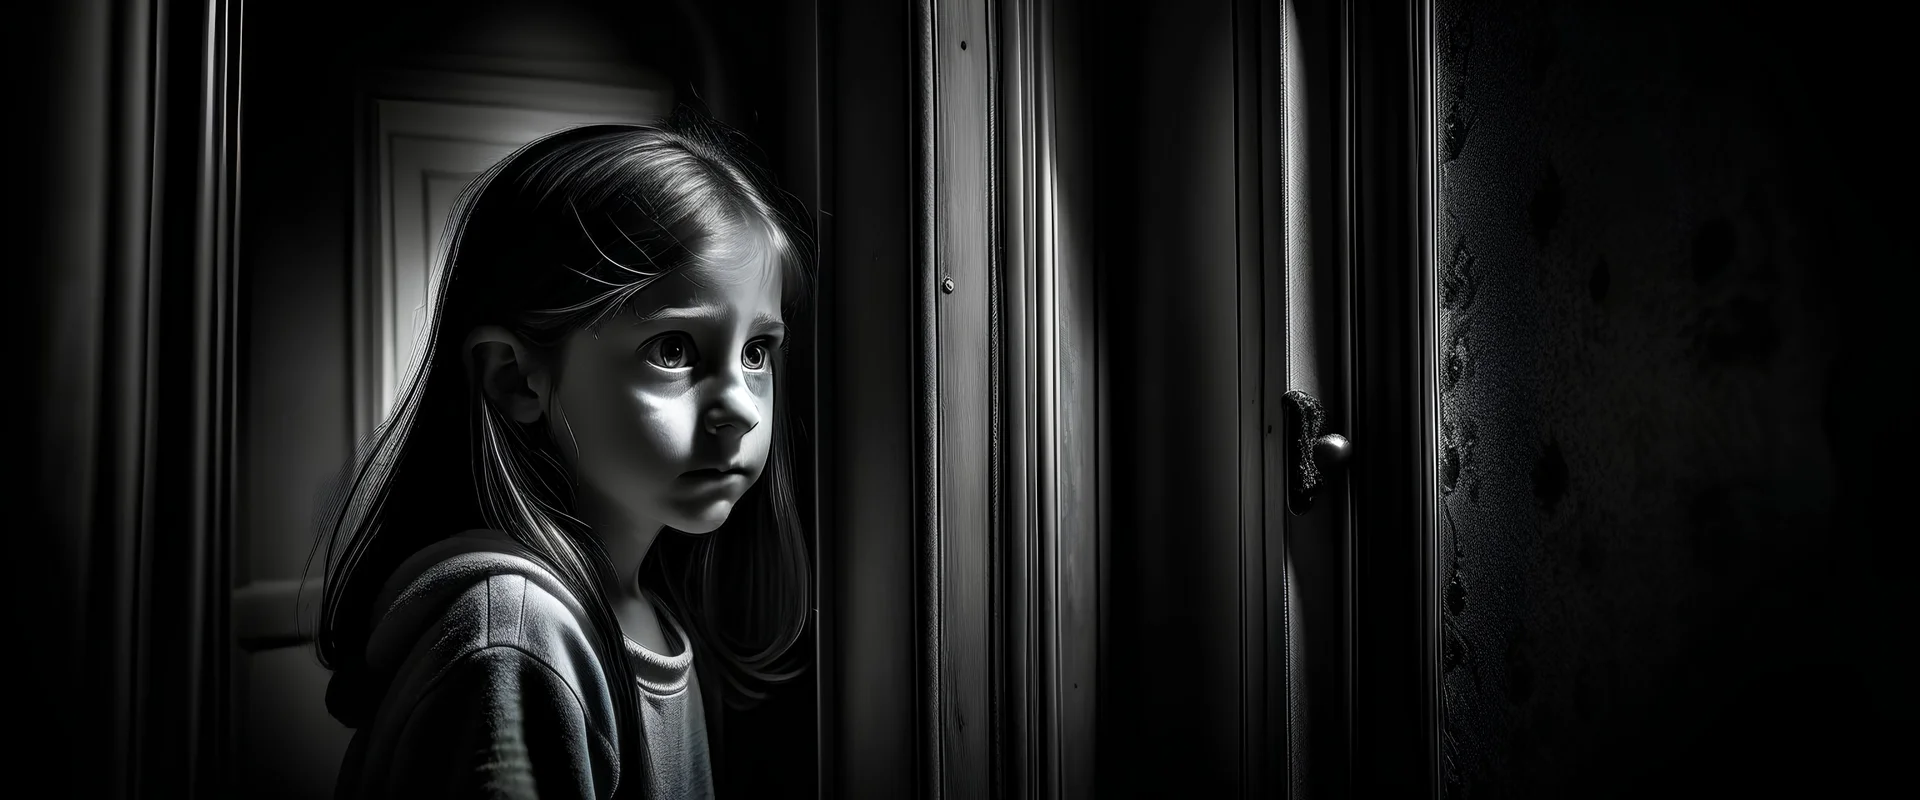 A girl stands behind the door of the room, gazing intently through it with a mixture of curiosity and sadness, as if trying to see what lies inside that mysterious room. Her eyes flicker with curiosity and confusion, and the contours of her face reflect questioning and a desire to understand the enigma hidden behind the closed doors. Soft light seeps through the gap between the door and the frame, casting its shimmering shadows on her quivering cheeks. The shadows dance in her destination room,